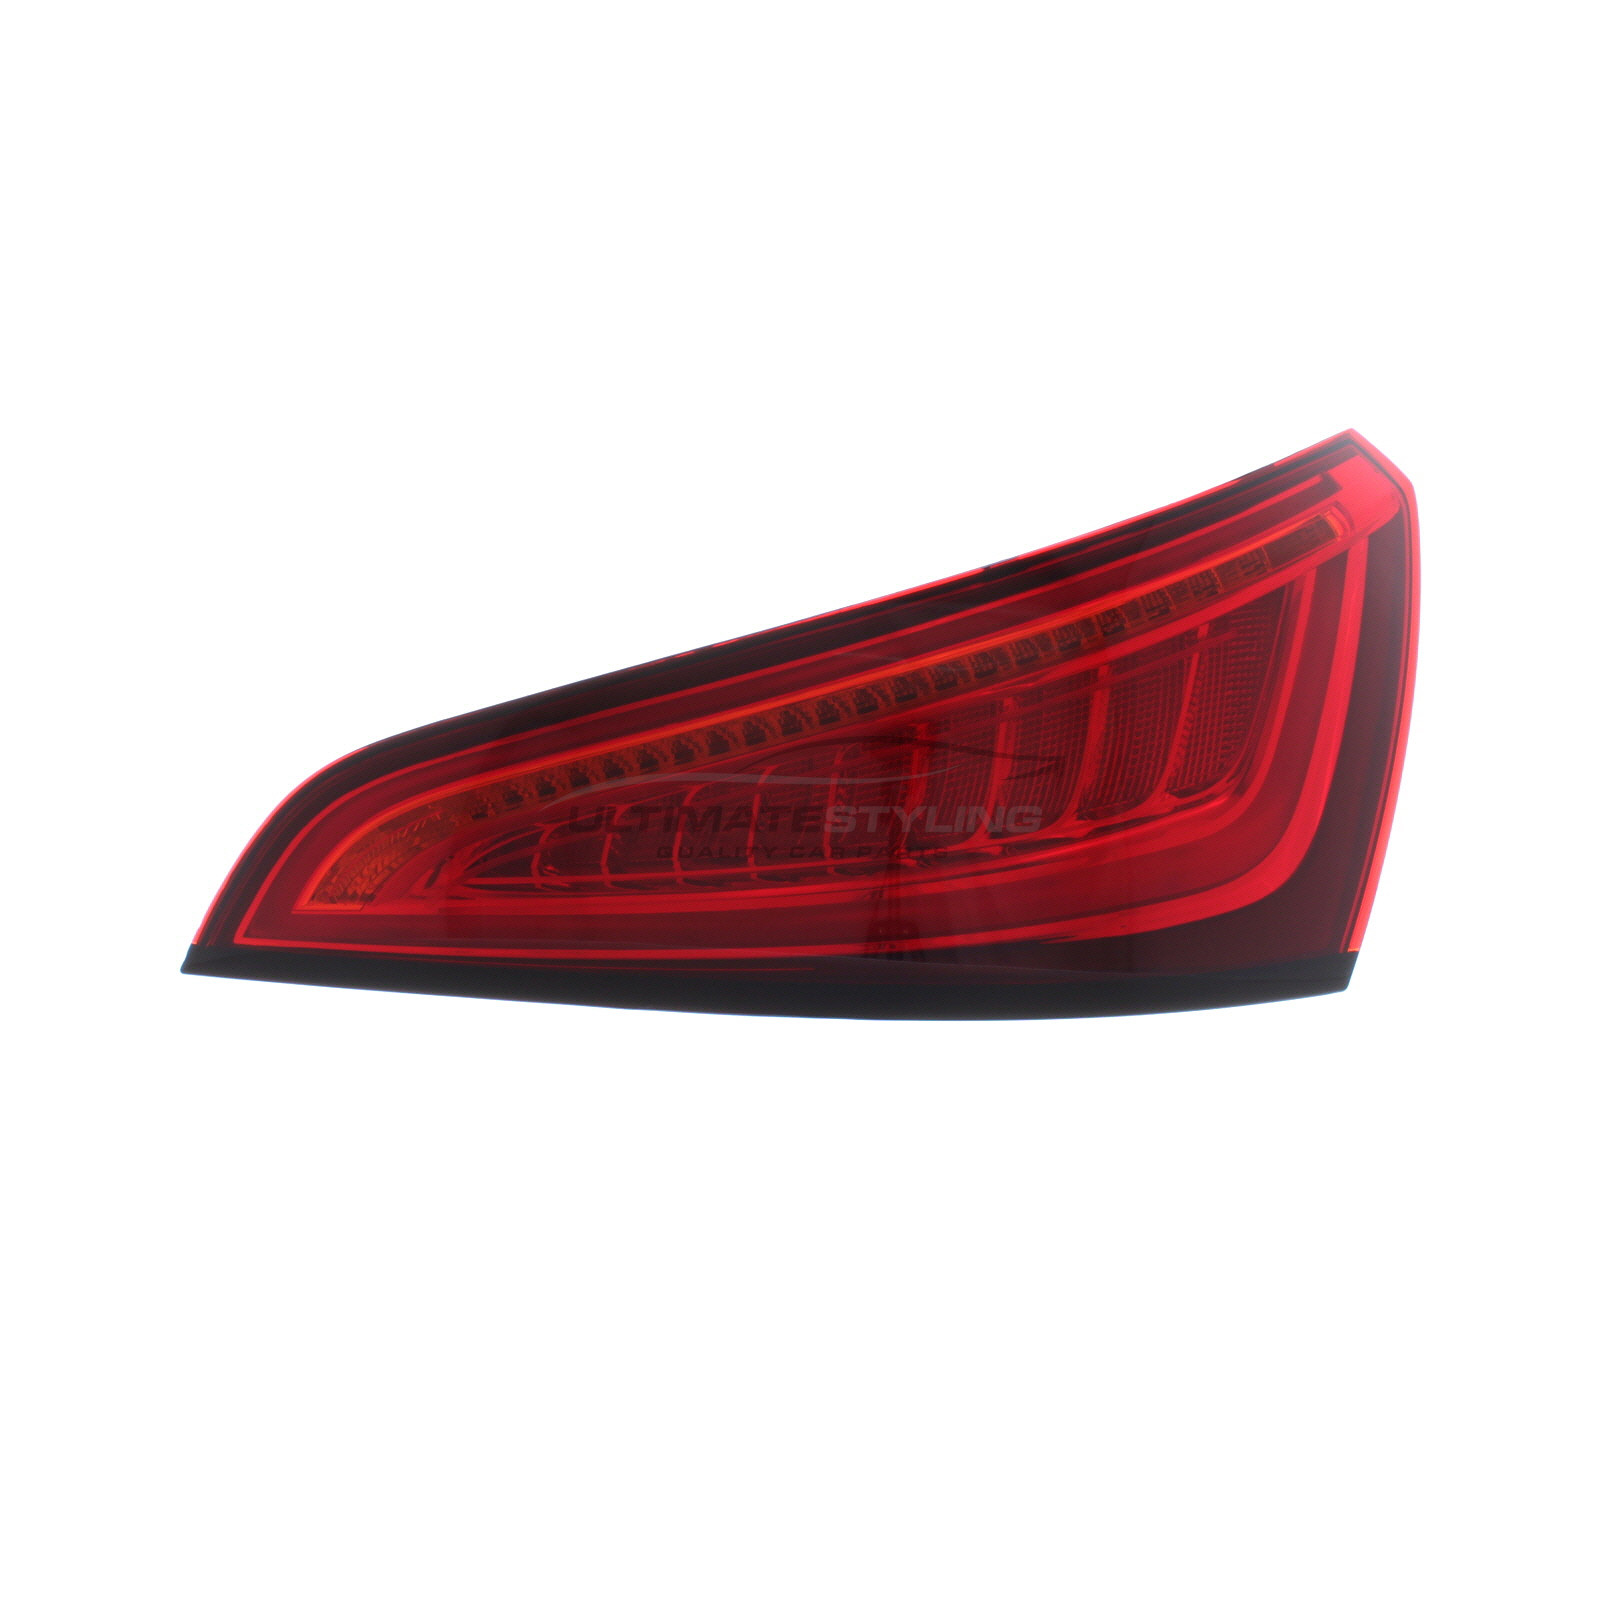 Audi Q5 2012-2017 / Audi SQ5 2012-2017 LED with Red Indicator Rear Light / Tail Light Including Bulb Holder Drivers Side (RH)